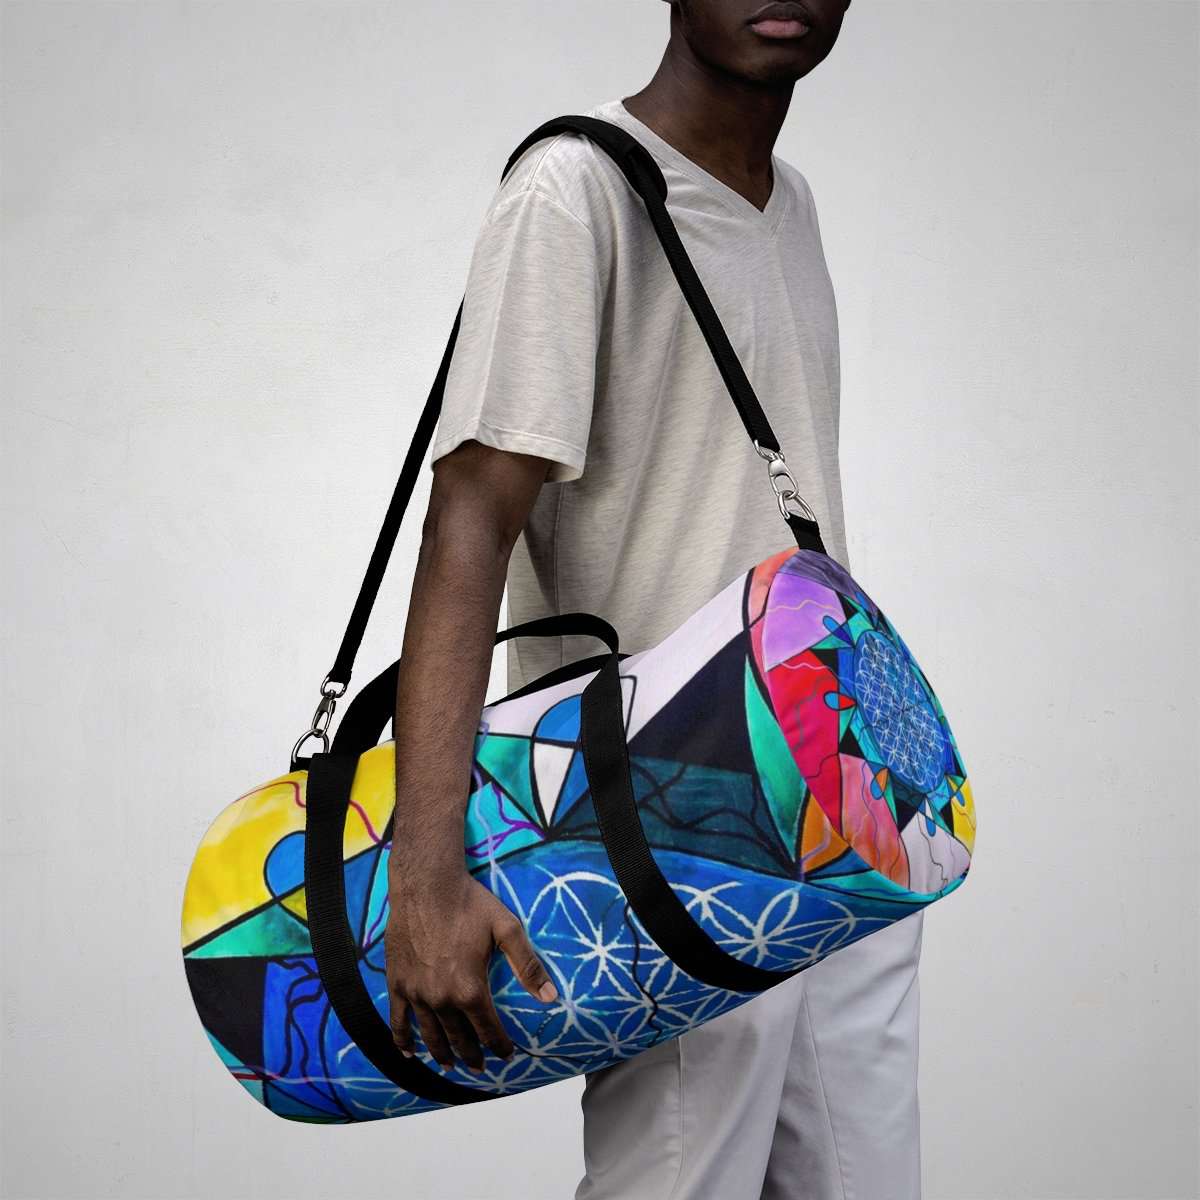 the-official-source-for-the-flower-of-life-duffle-bag-online_11.jpg